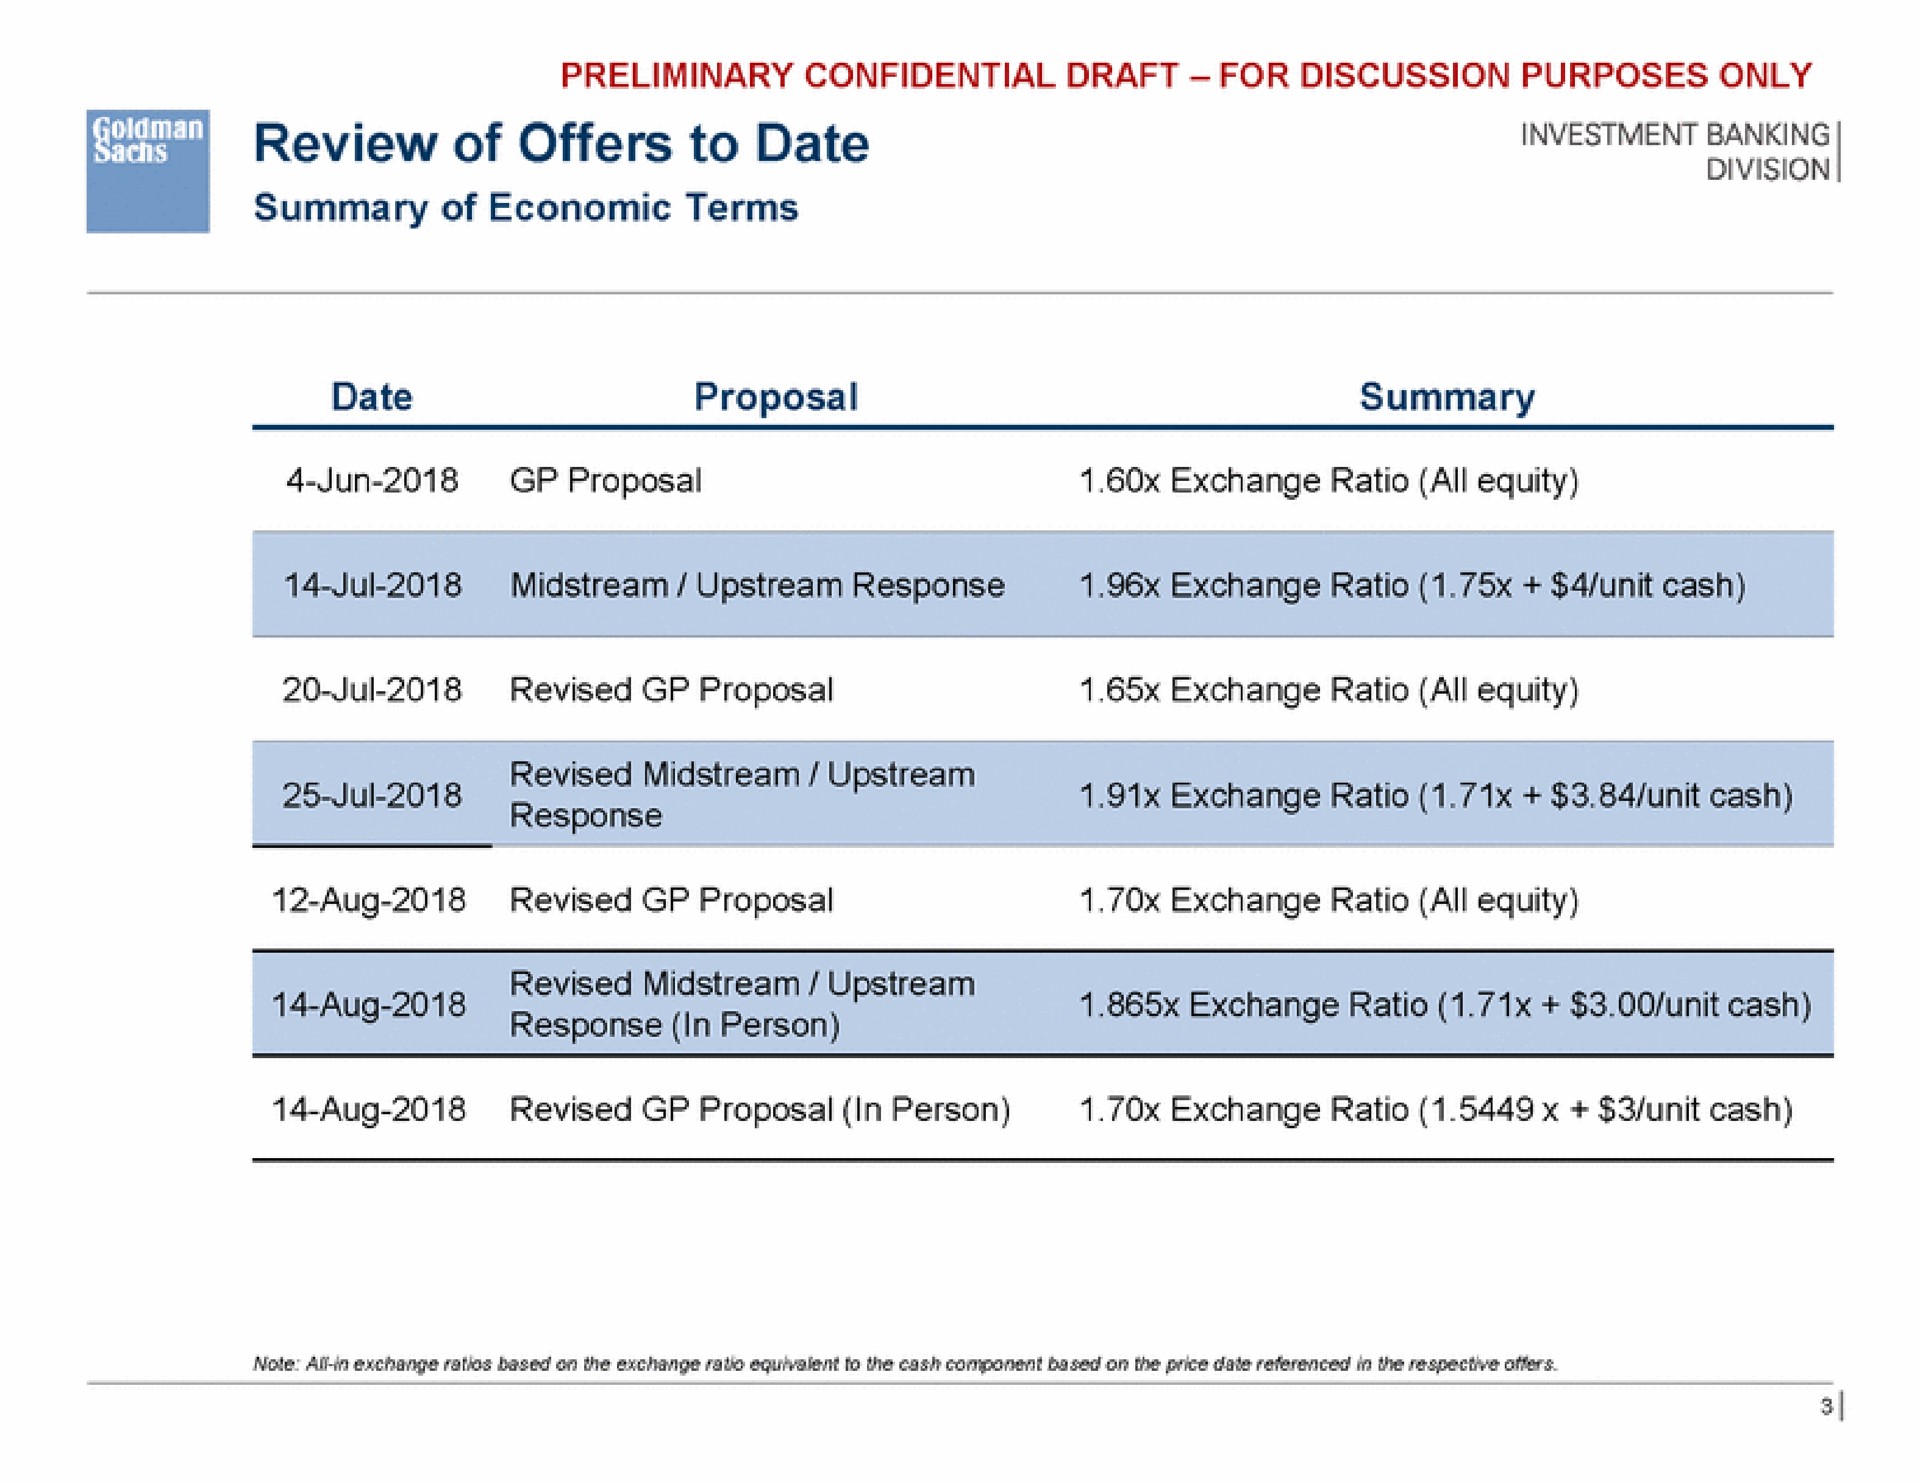 review of offers to date upstream revised midstream on exchange ratio all equity | Goldman Sachs